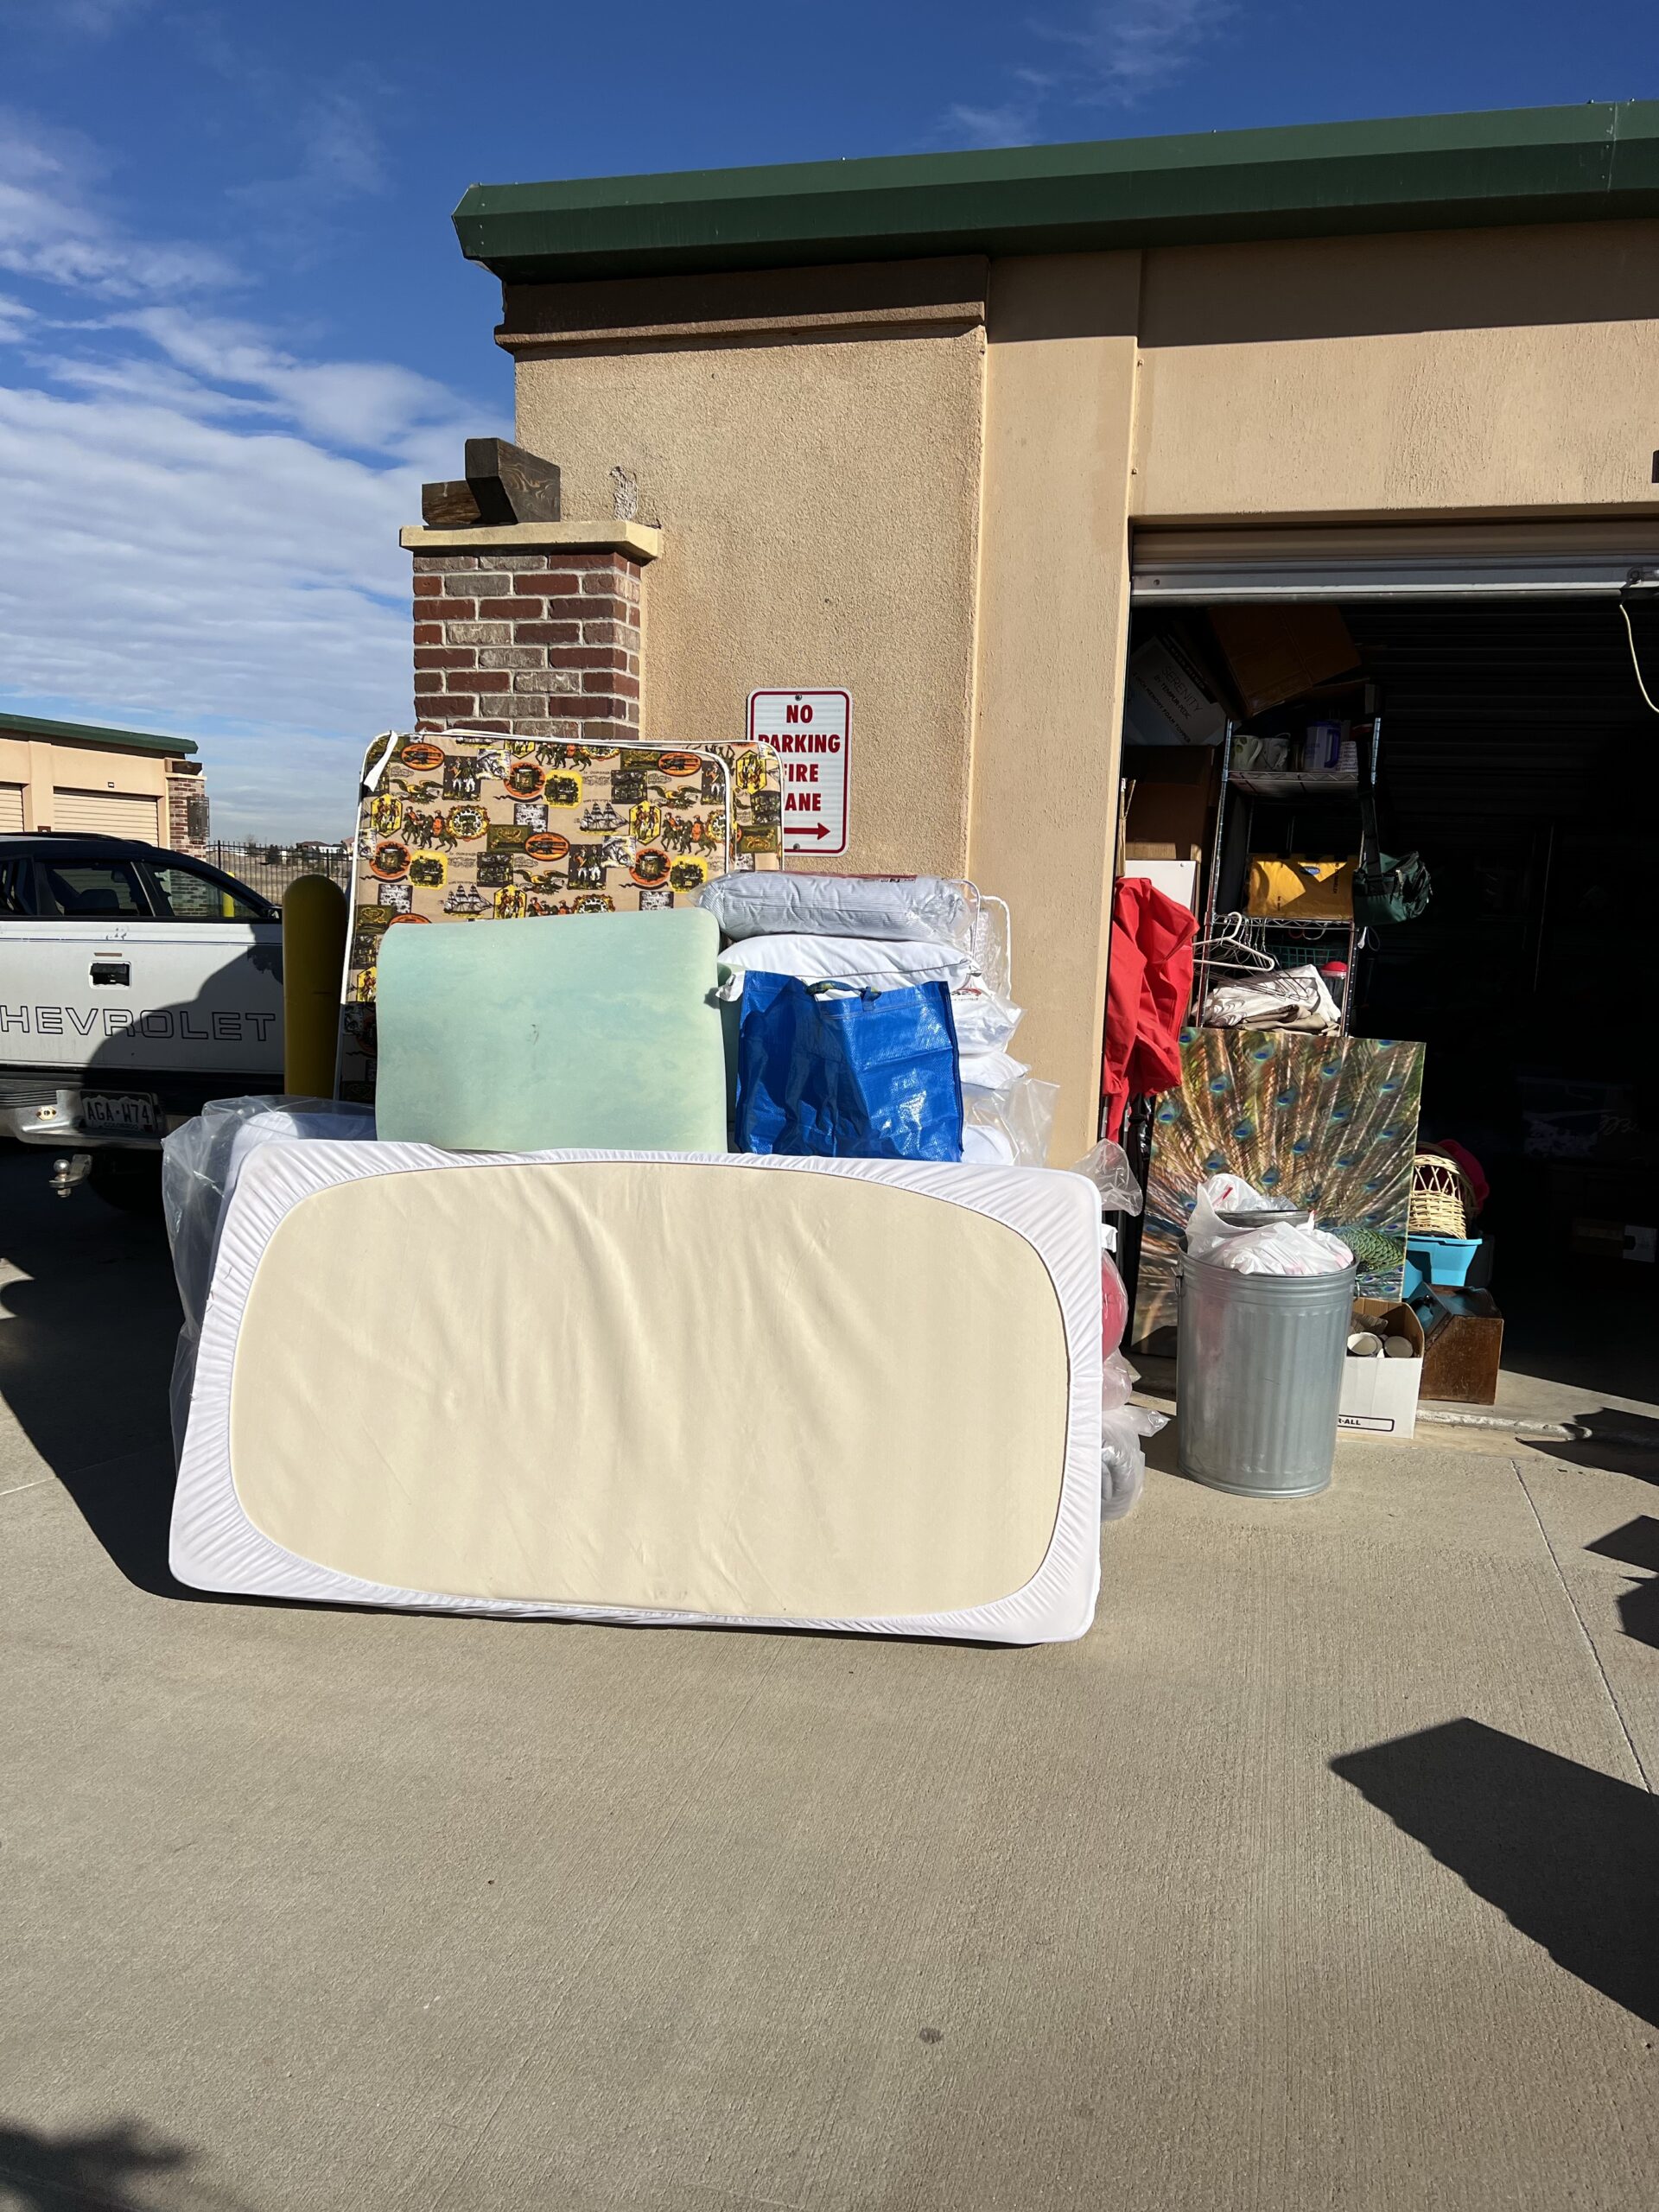 A pile of mattresses and pillows in front of a garage.